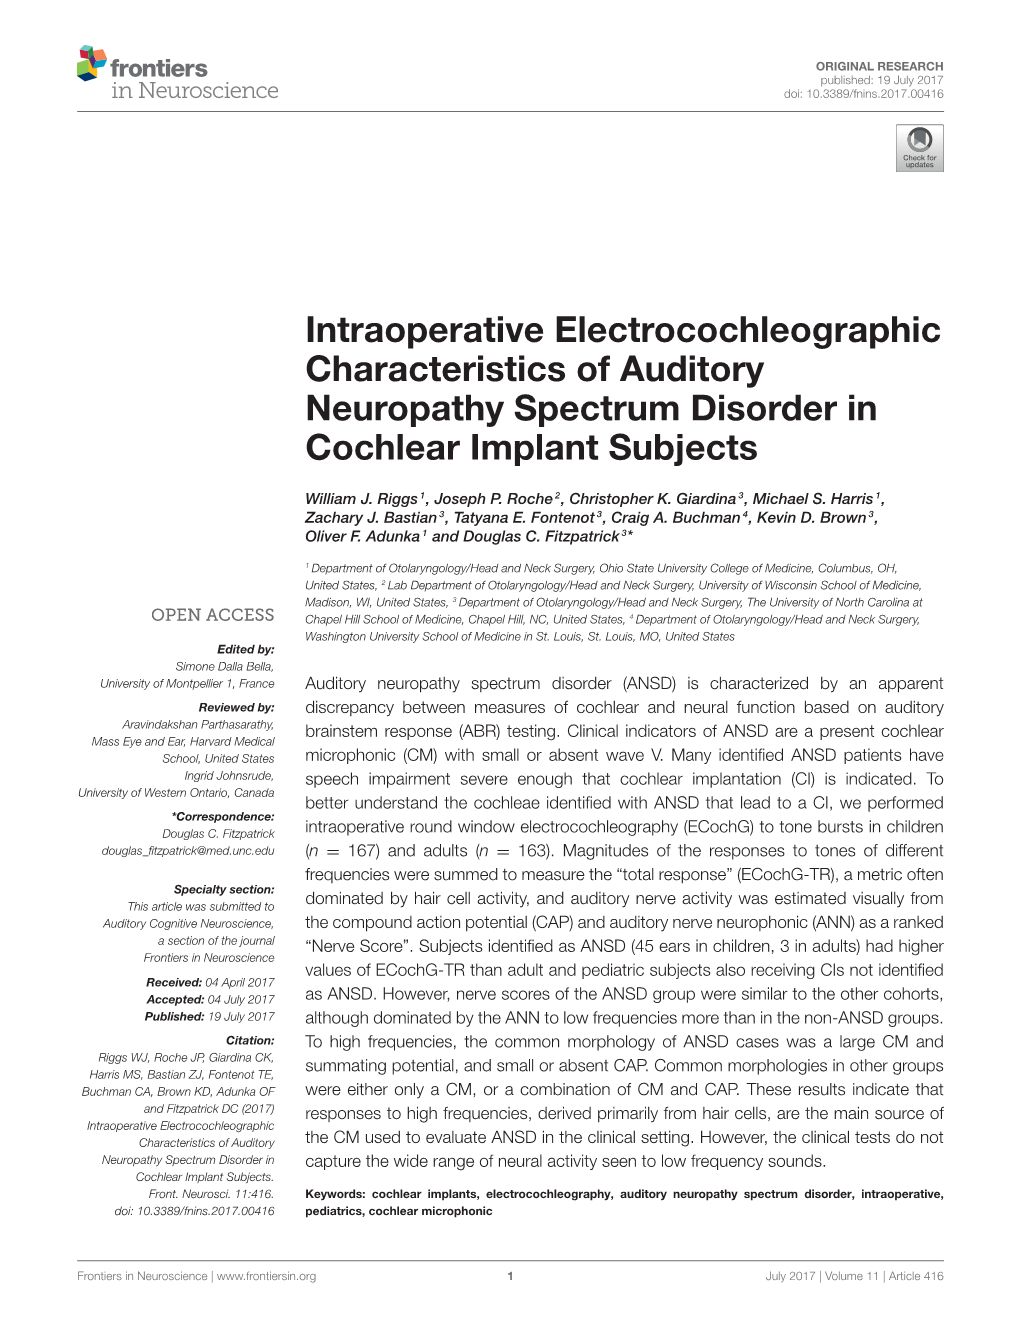 Intraoperative Electrocochleographic Characteristics of Auditory Neuropathy Spectrum Disorder in Cochlear Implant Subjects